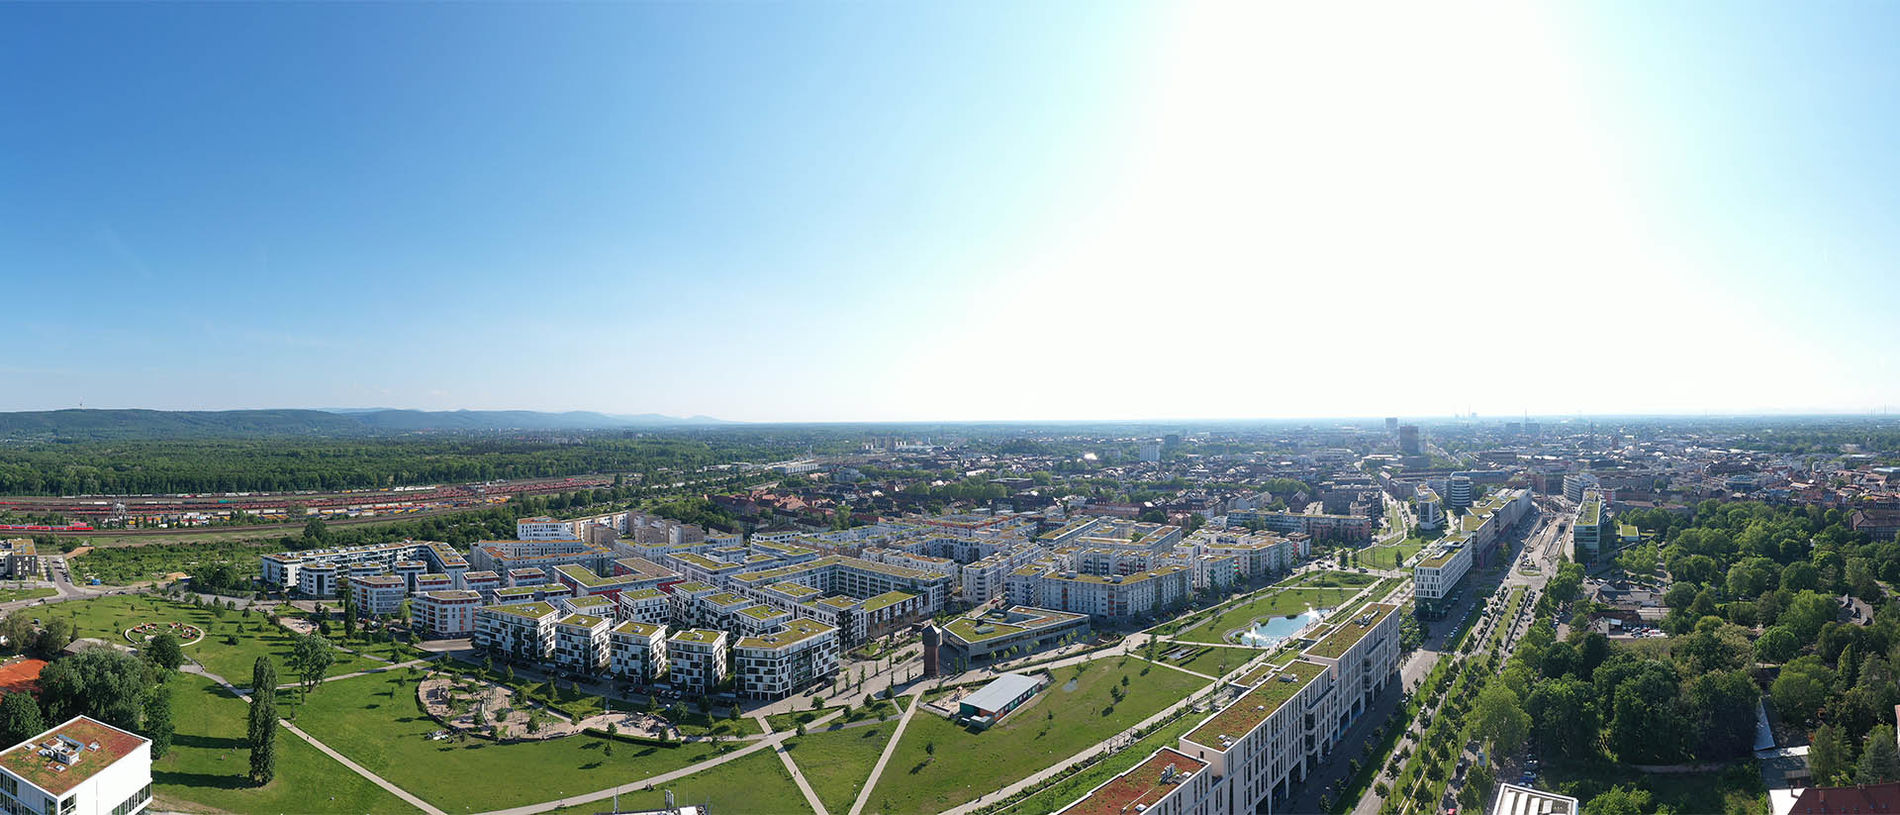 Drone image oft the Coty Park Karlsruhe with the surroundings on a sunny day